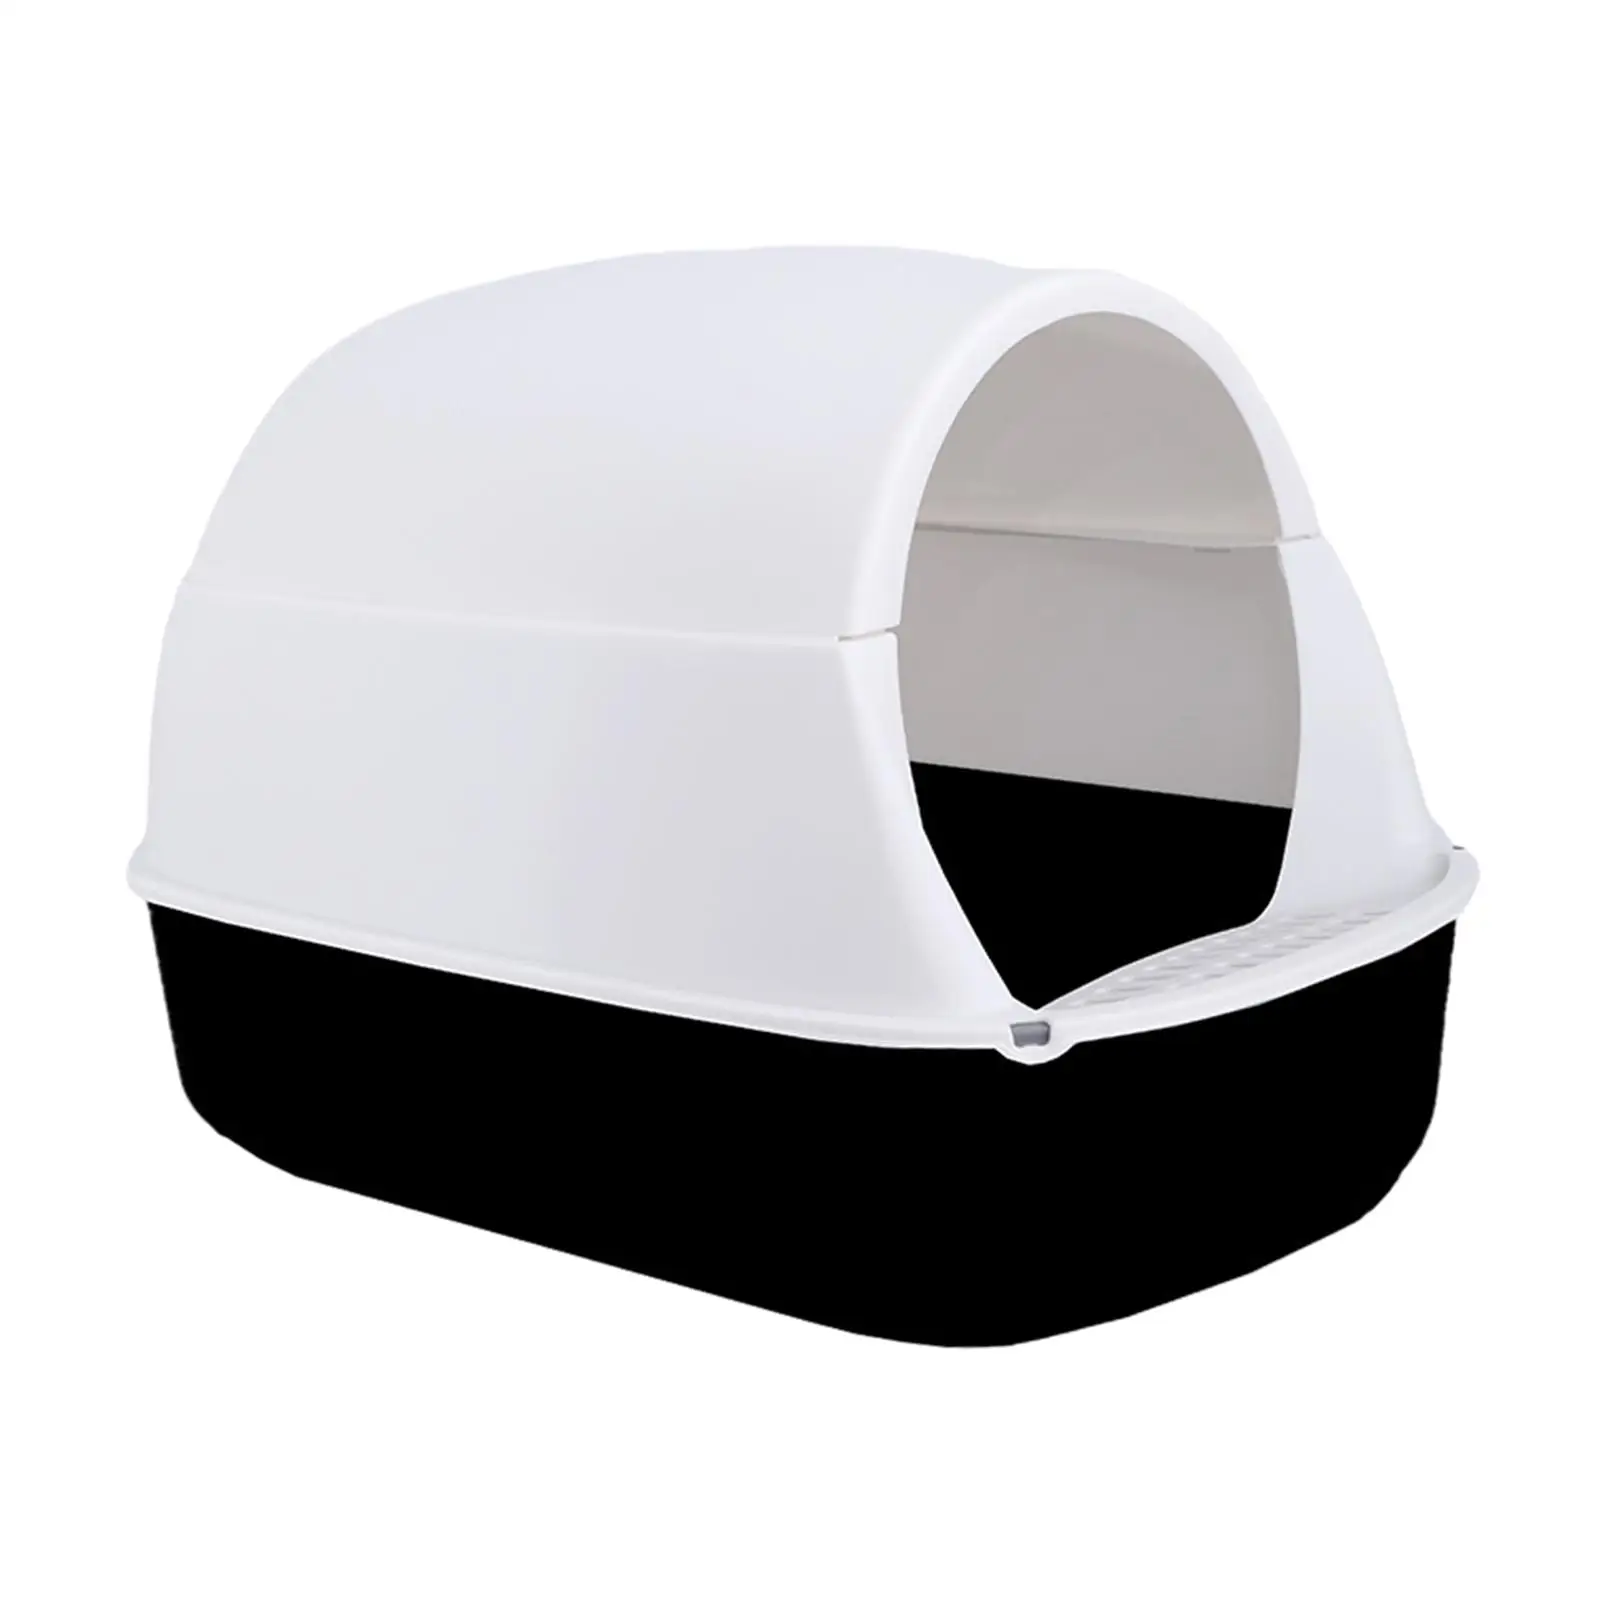 Hooded Cat Litter Box for Indoor Cats Pet Supplies Portable Easy to Clean Removable Cat Toilet Kitty Litter Pan Large Cat Potty